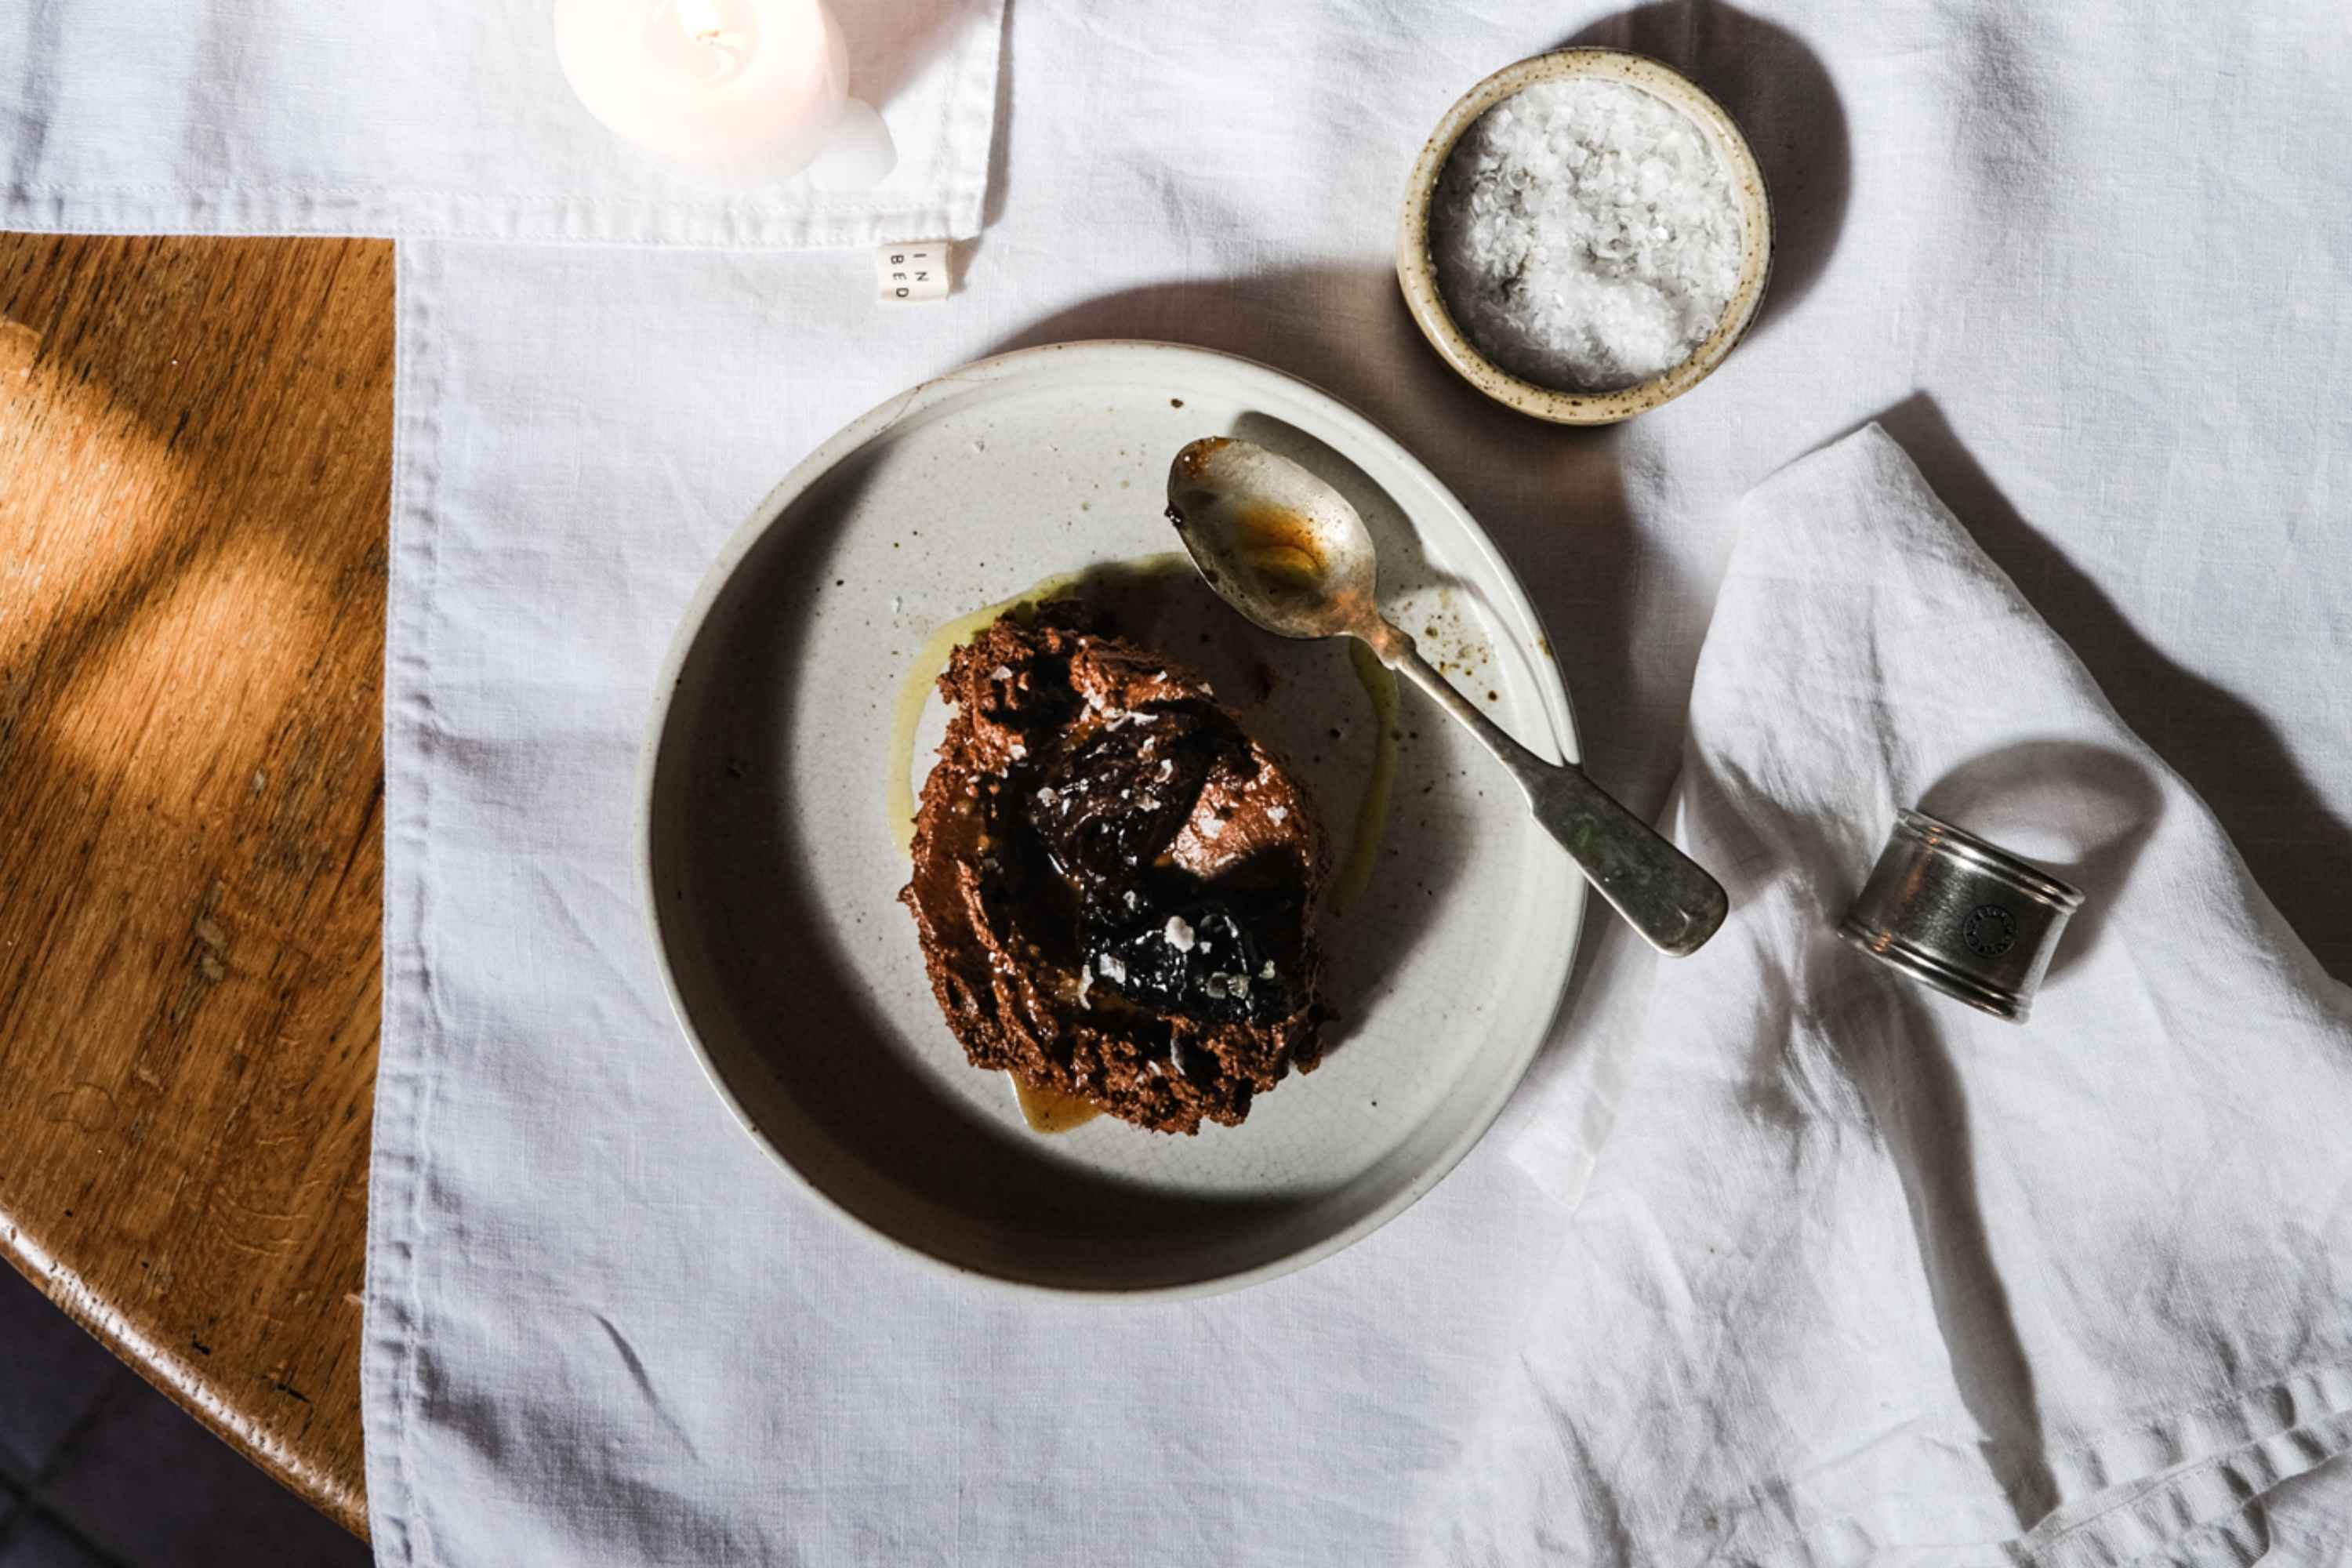 Silvia’s Chocolate Mousse With Whiskey-Soaked Prunes – IN BED Store